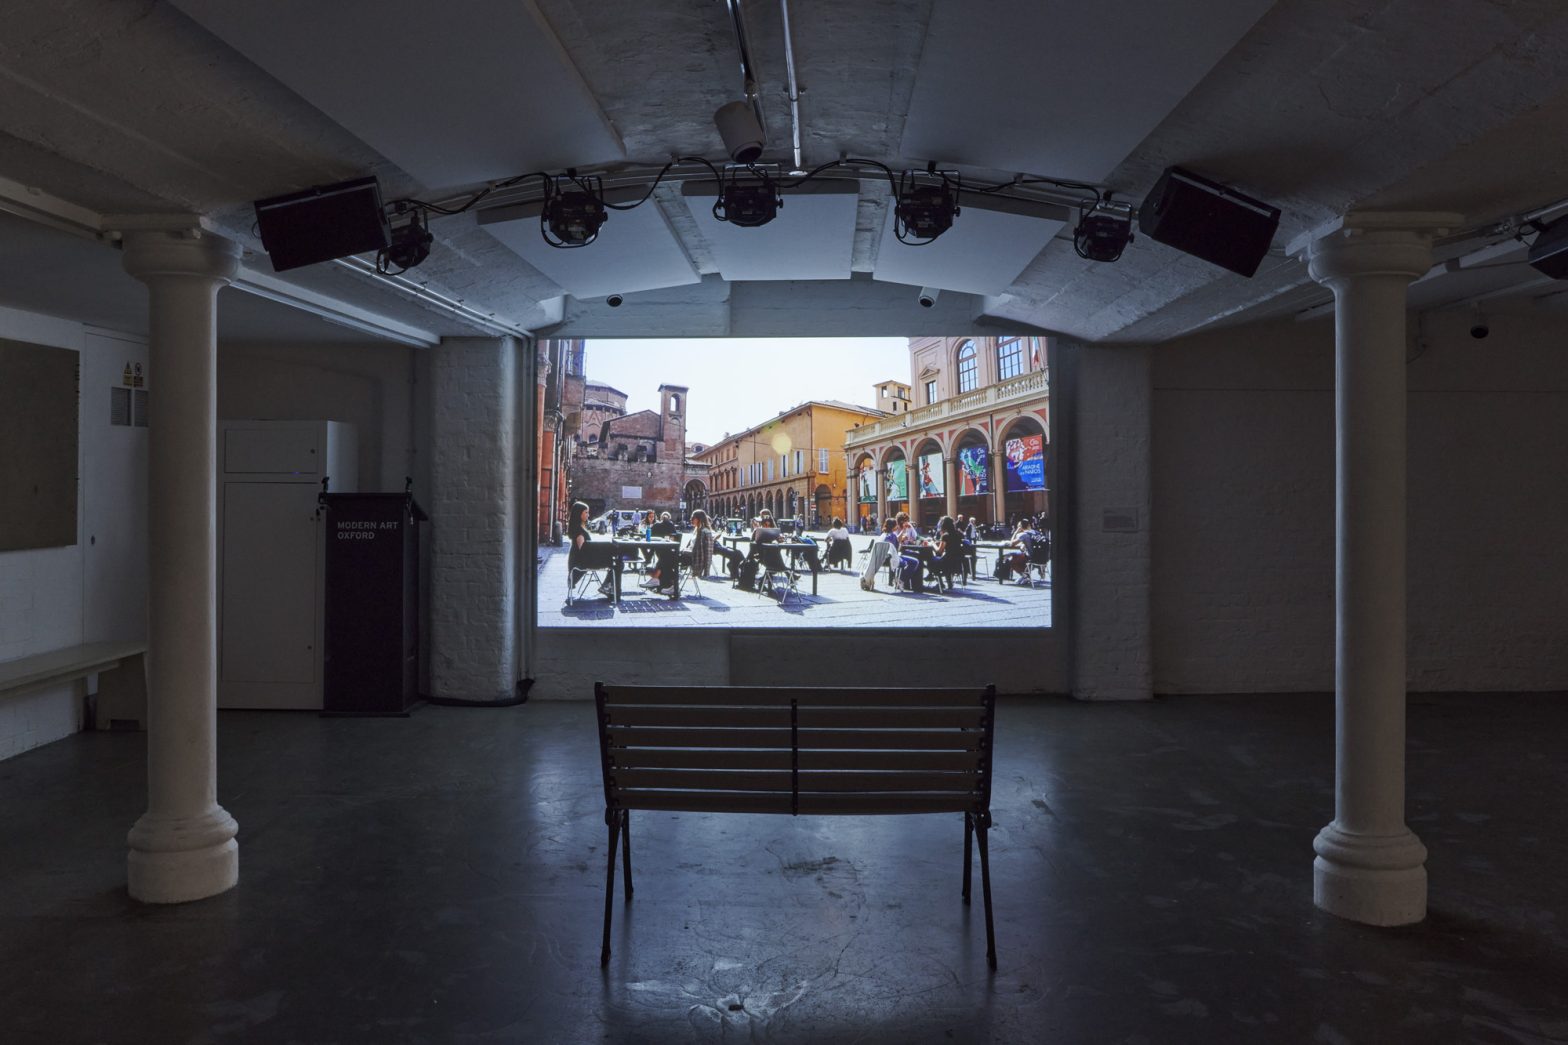 A screen with an image of a town square projected on it in a darkened room, framed by two white columns. A park bench is placed in front of the screen.